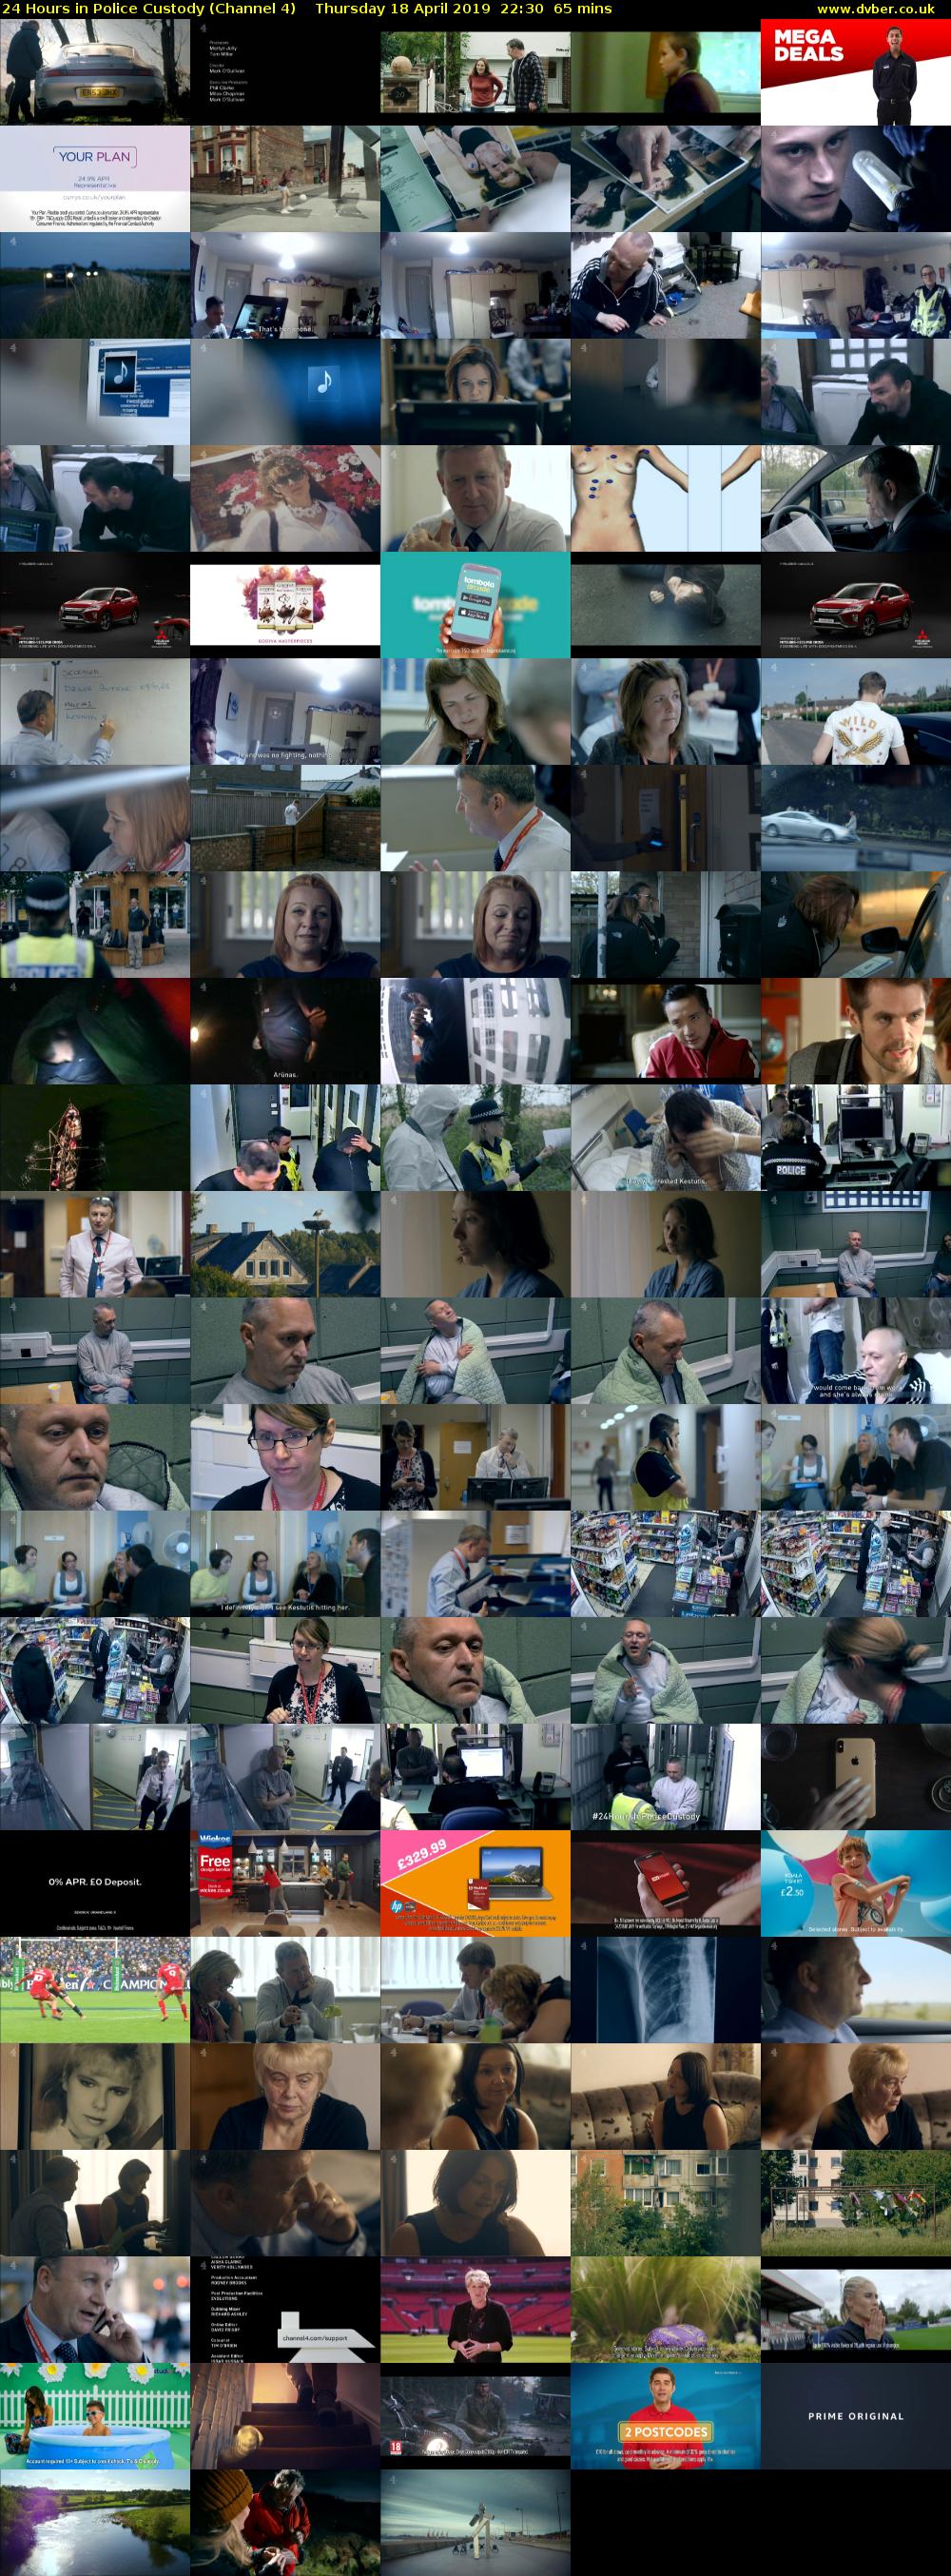 24 Hours in Police Custody (Channel 4) Thursday 18 April 2019 22:30 - 23:35